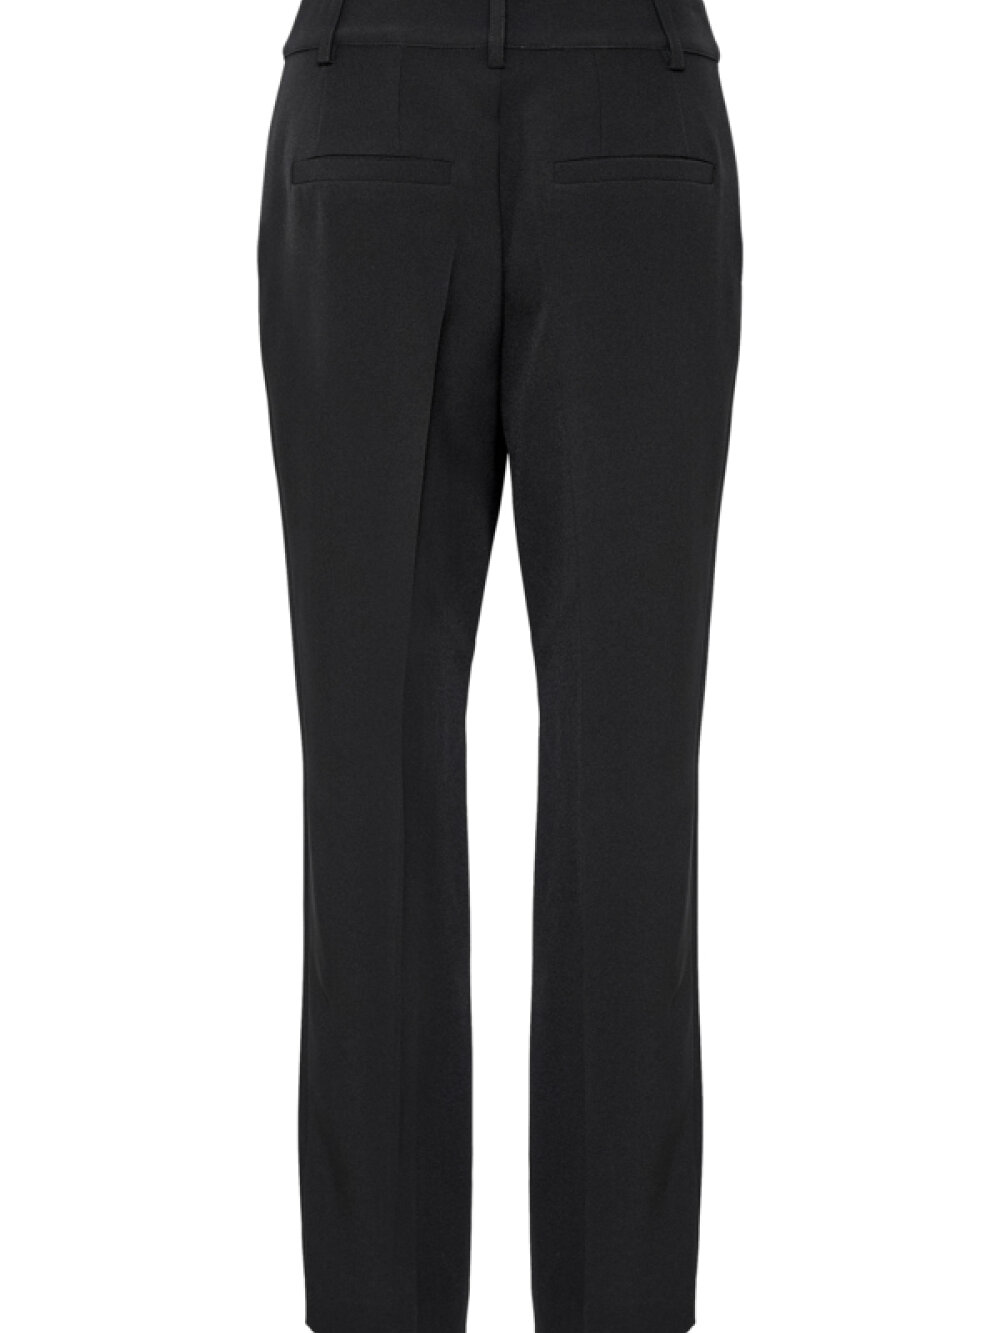 My Essential Wardrobe - 36 The Tailored Straight Pant Bukser